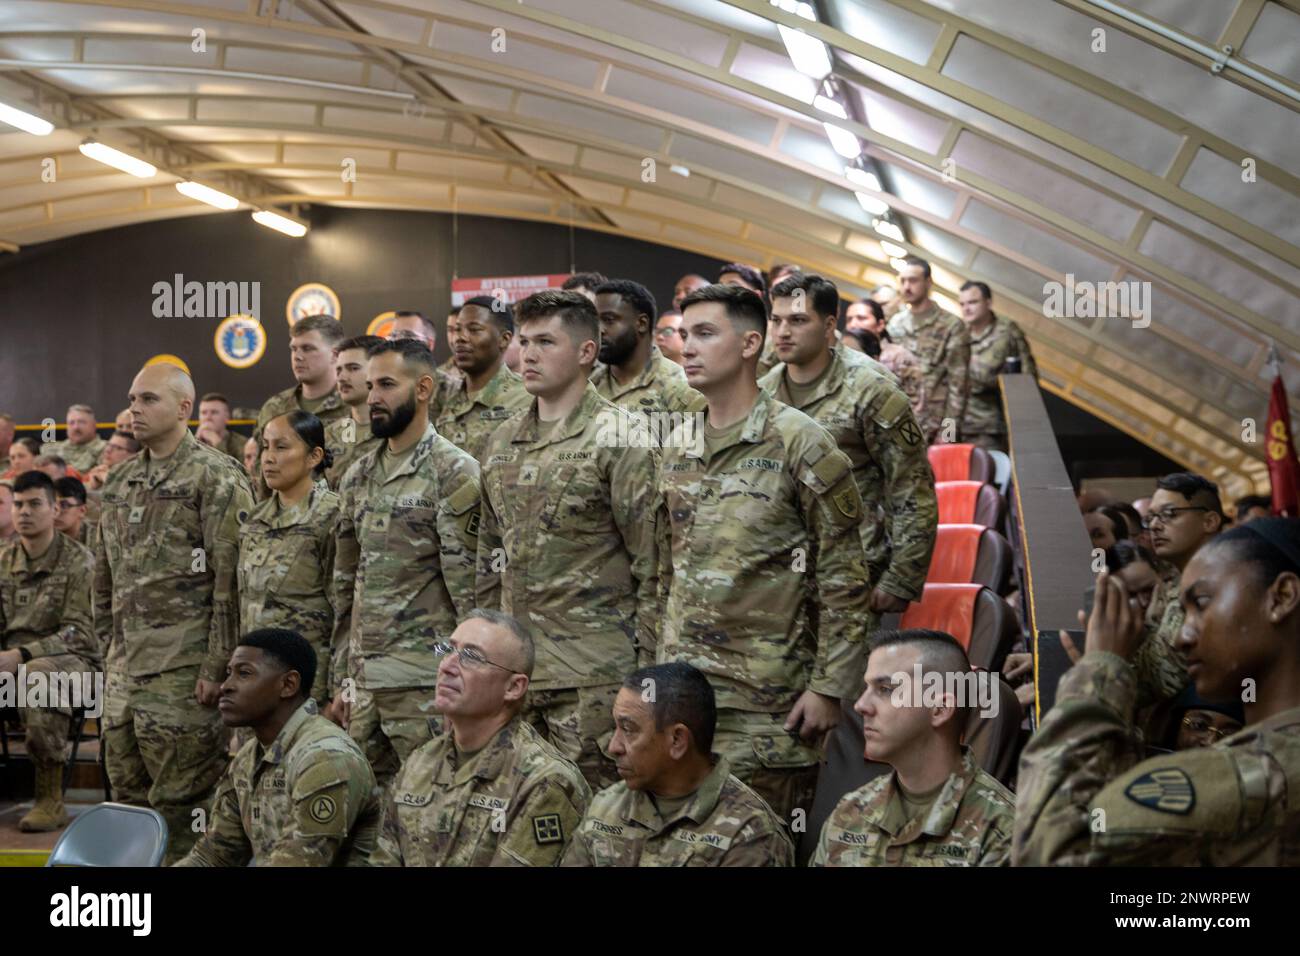 U.S. Army Soldiers who completed their Basic Leader Course (BLC) stand and receive recognition during a BLC graduation ceremony held in a theatre tent on Camp Buehring, Kuwait, Jan. 25, 2023. Stock Photo